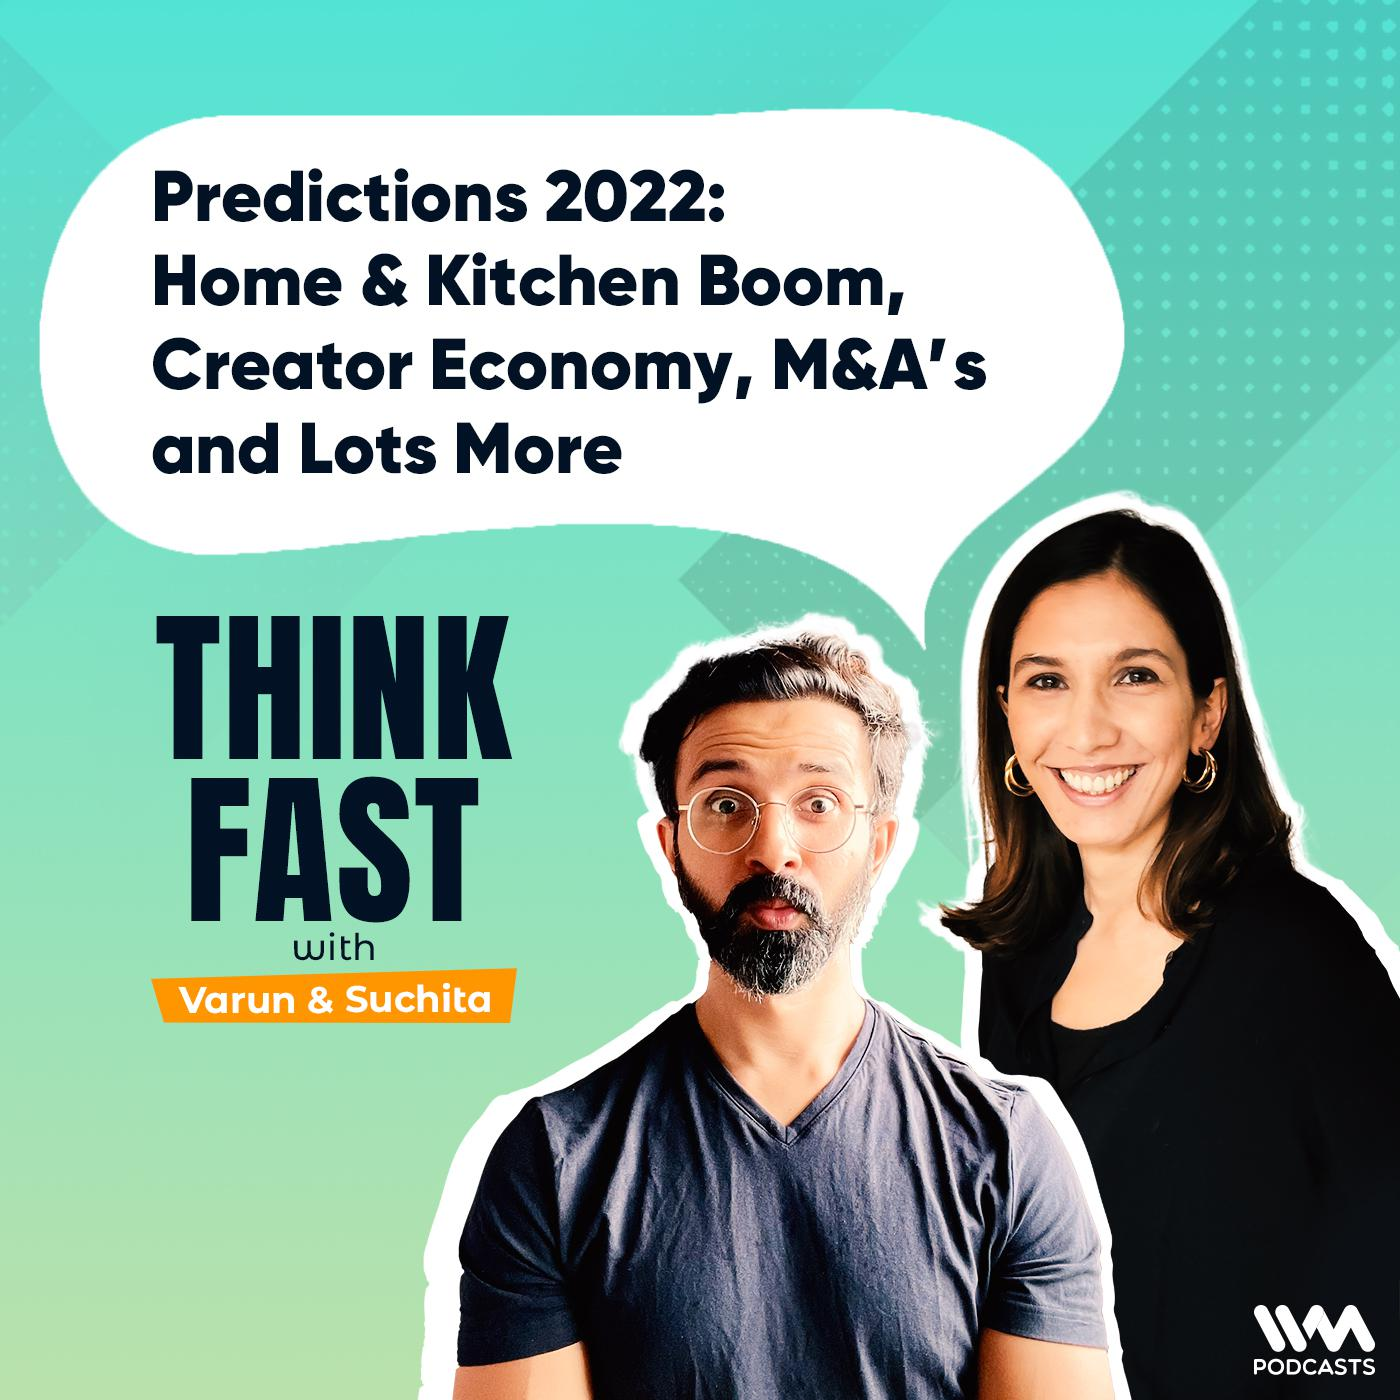 Predictions 2022: Home & Kitchen Boom, Creator Economy, M&A’s and Lots More